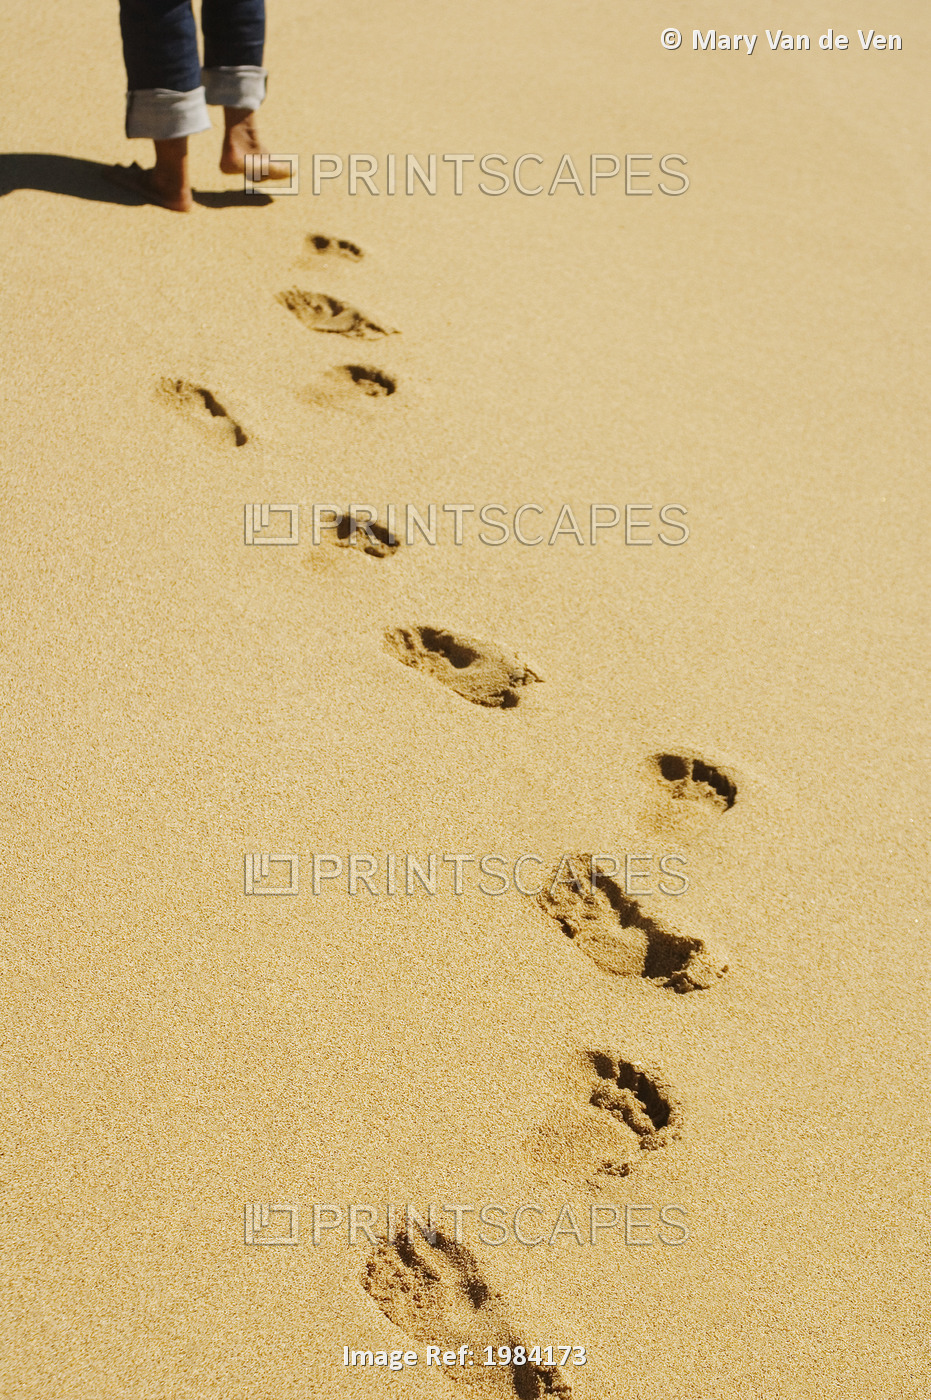 Footprints In Sand With Legs (Wearing Jeans) And Feet At Top Of Picture.